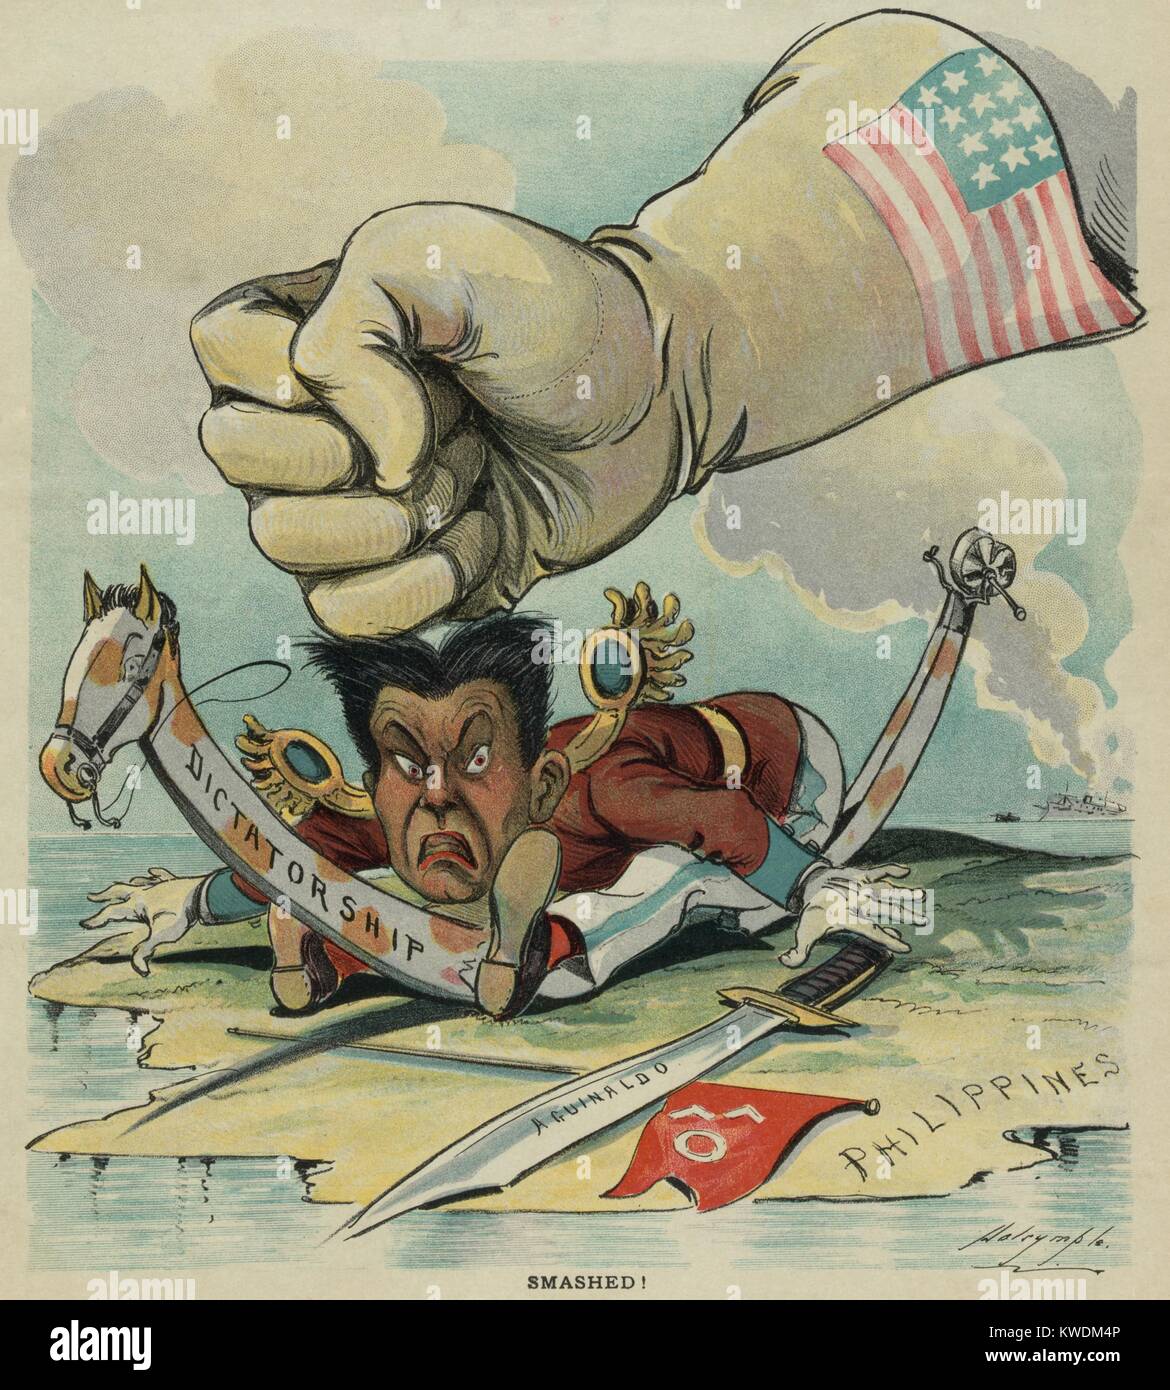 SMASHED! American political cartoon prematurely declaring victory over Philippine insurgency. March 8, 1899. A giant American gloved fist holds down Filipino leader, Emilio Aguinaldo. In fact, the Philippine-American War had just begun in February 1899 and would continue until July 1902 (BSLOC 2017 10 76) Stock Photo